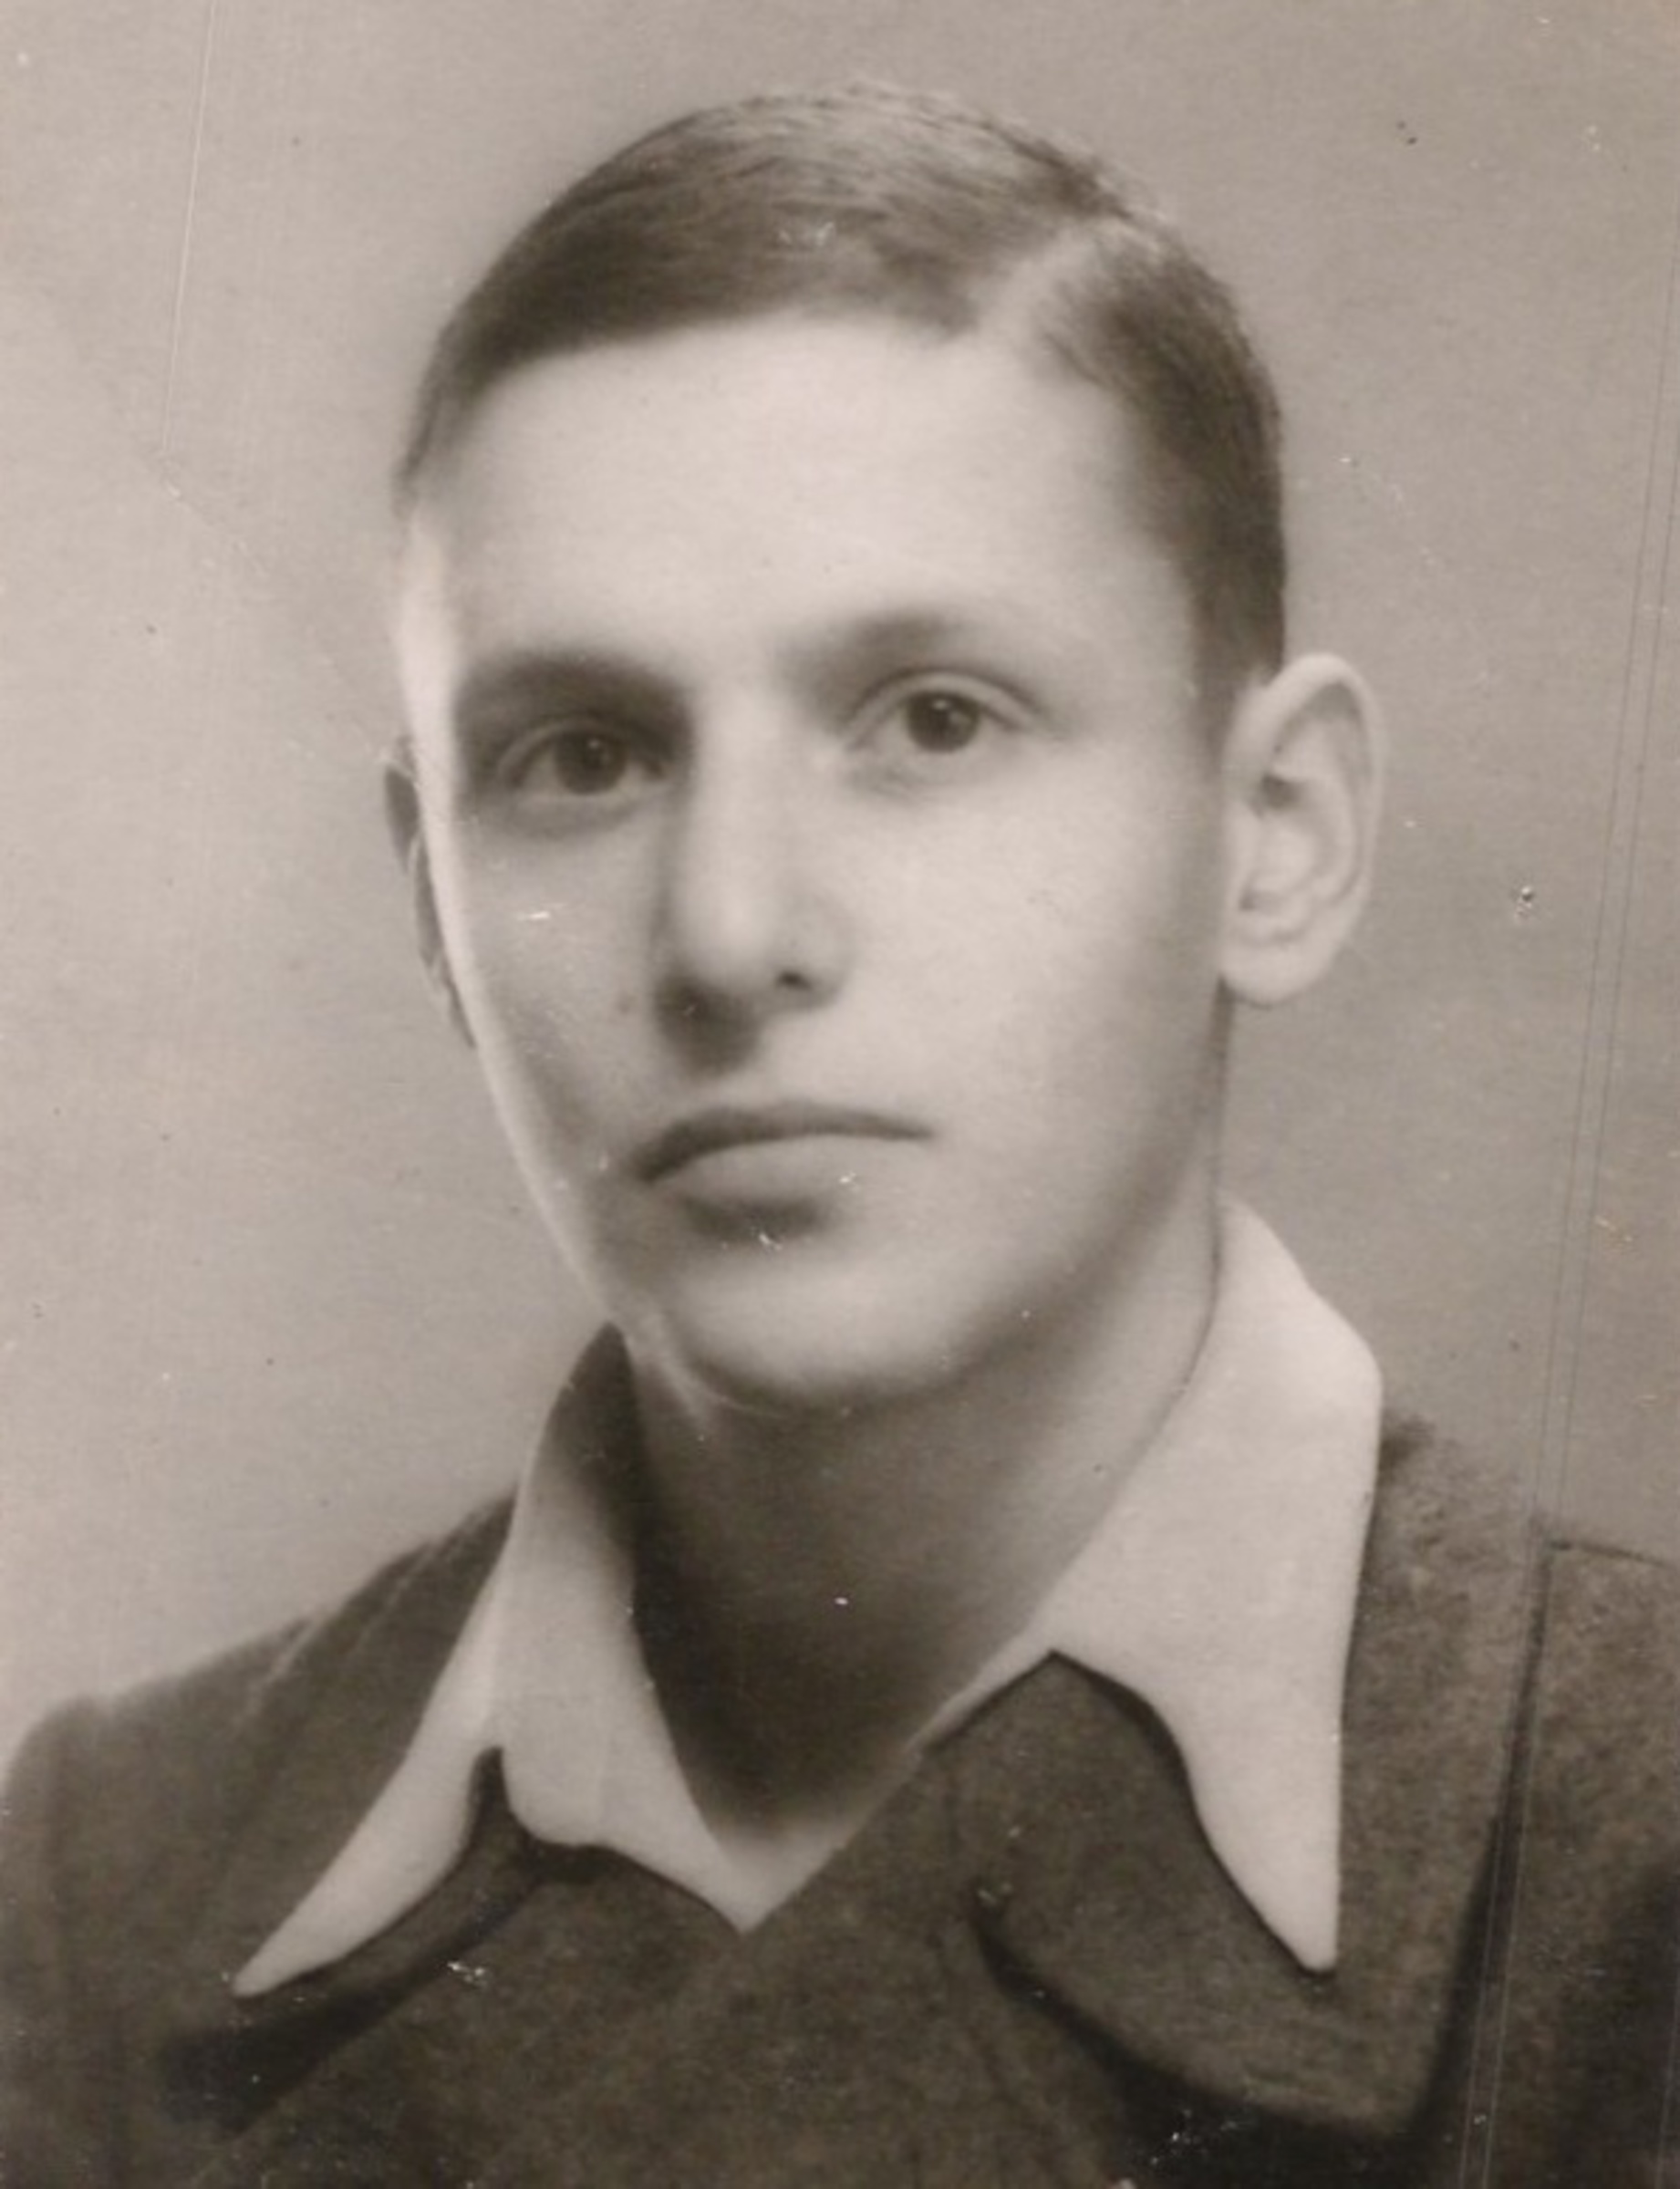 Max Lieben after his return from the concentration camp in 1945